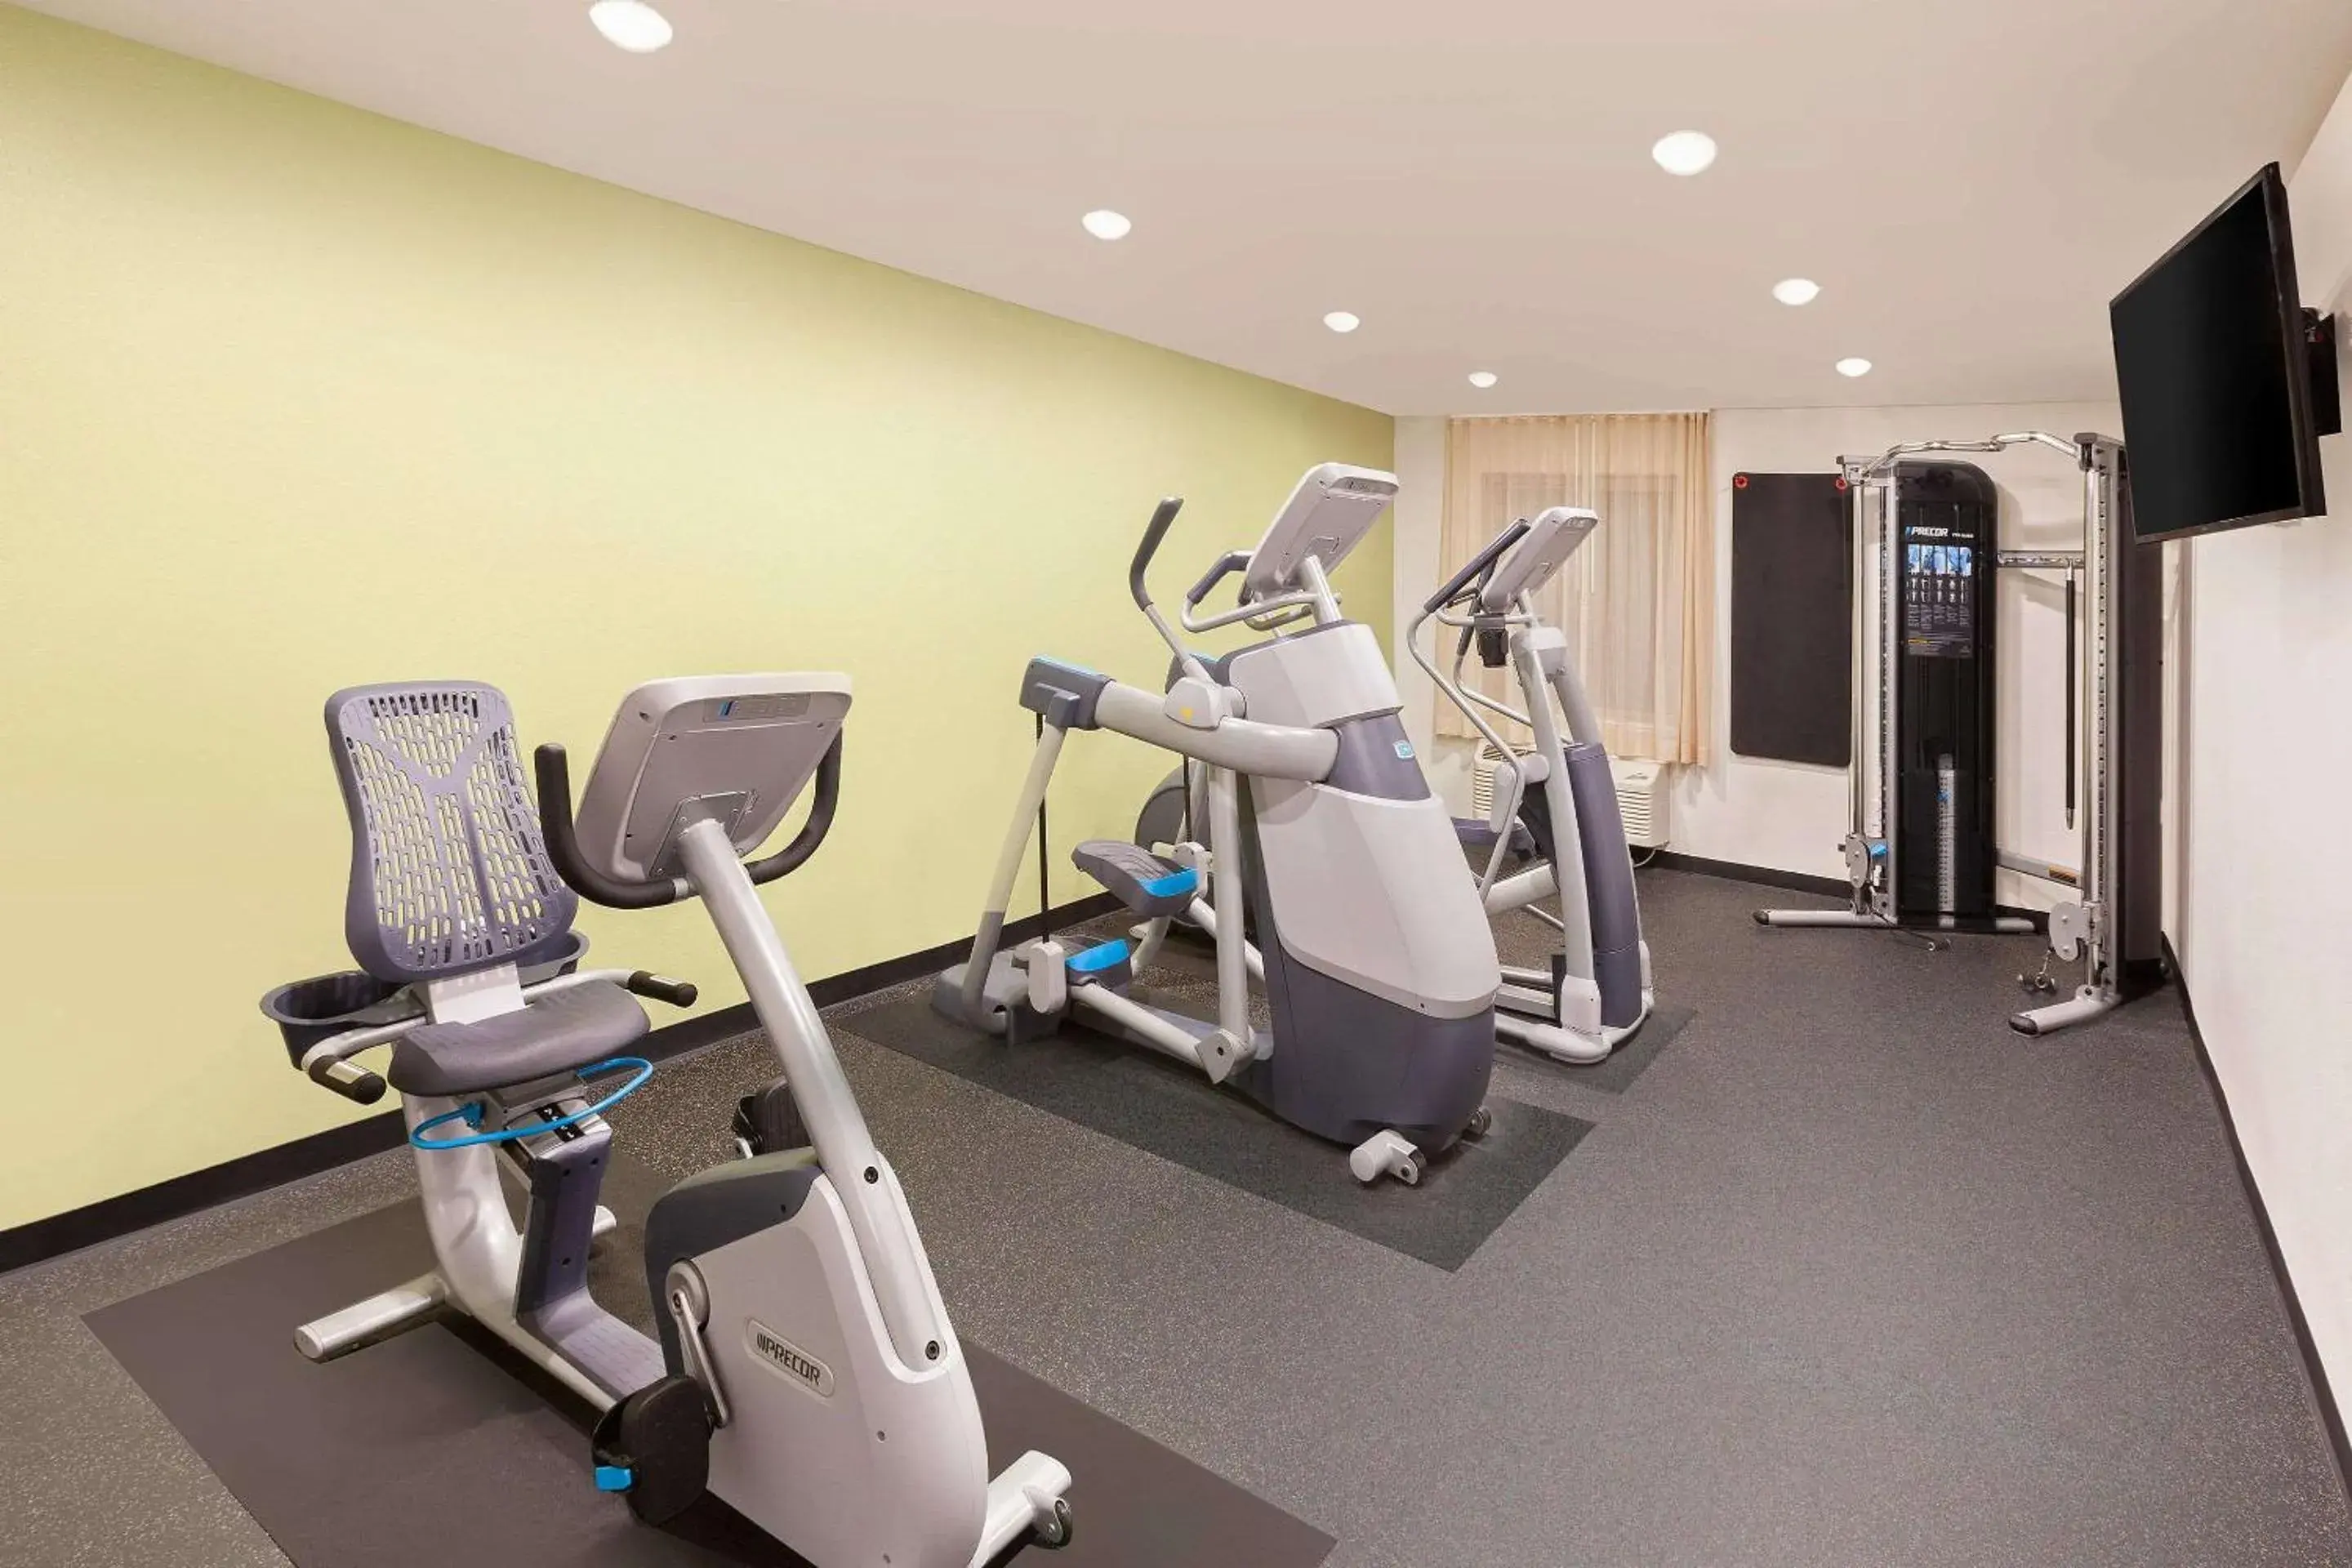 Fitness centre/facilities, Fitness Center/Facilities in WoodSpring Suites Las Colinas